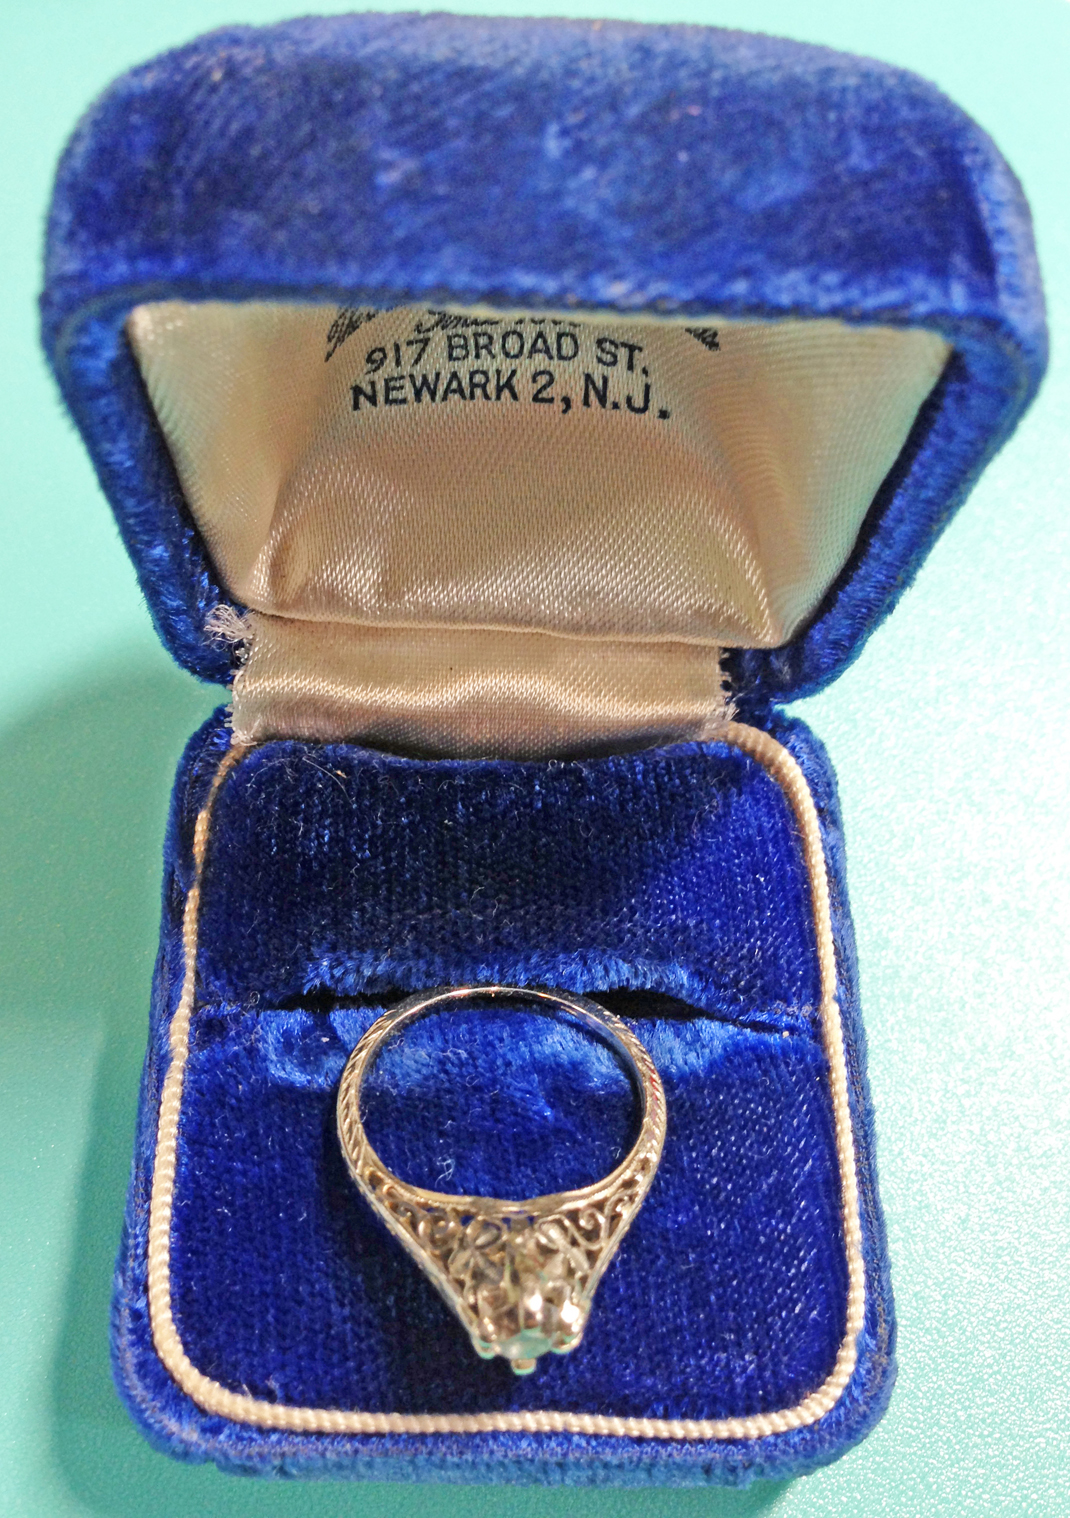 Beatrice Agnes Reynolds’s engagement ring. (Photo courtesy of the author)